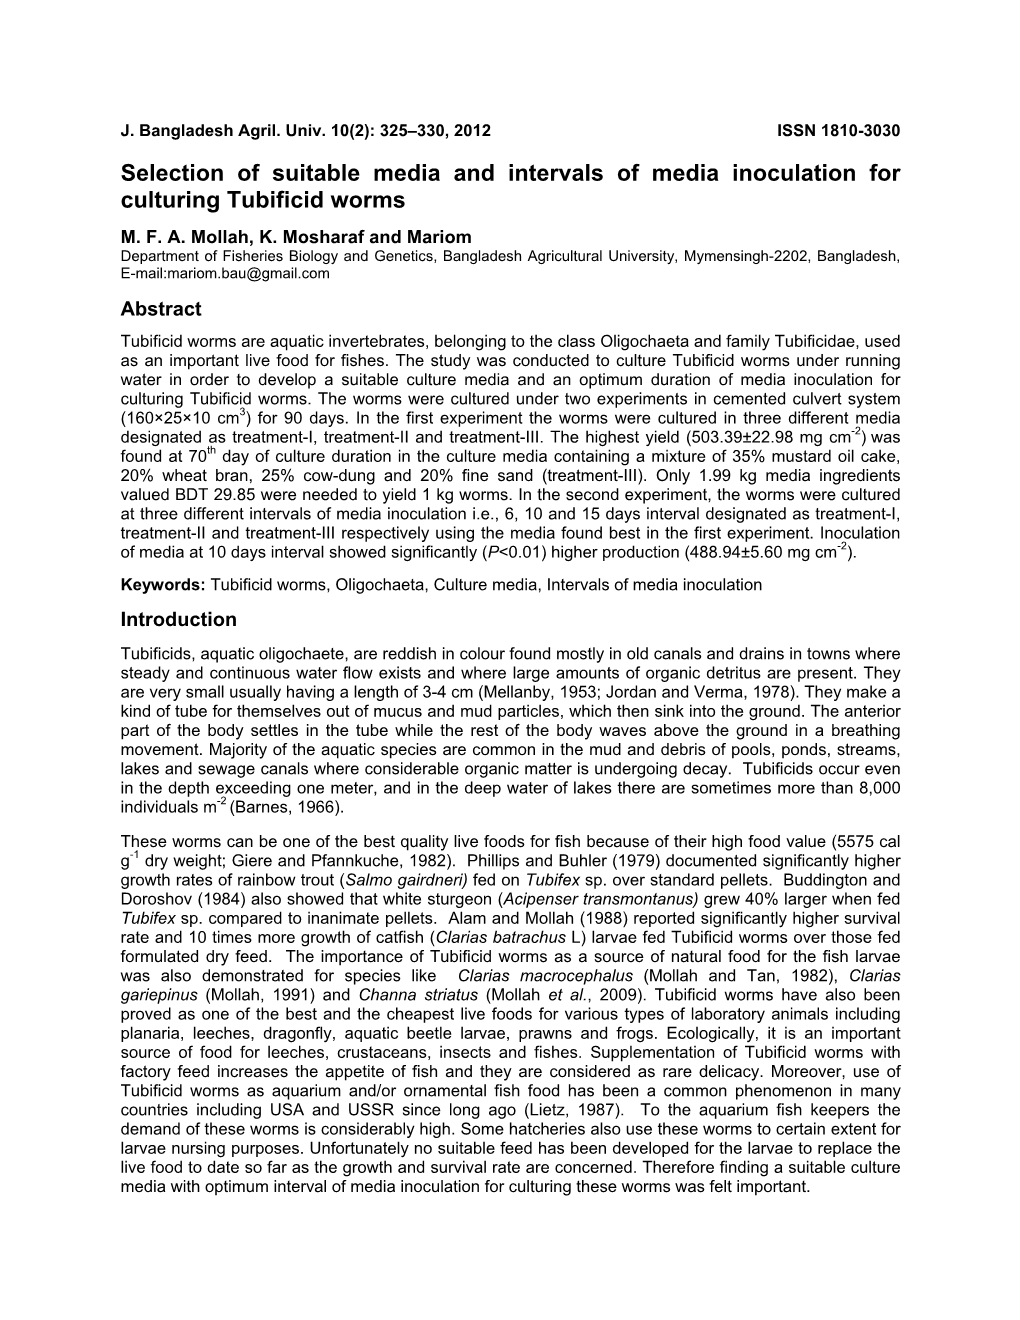 Selection of Suitable Media and Intervals of Media Inoculation for Culturing Tubificid Worms